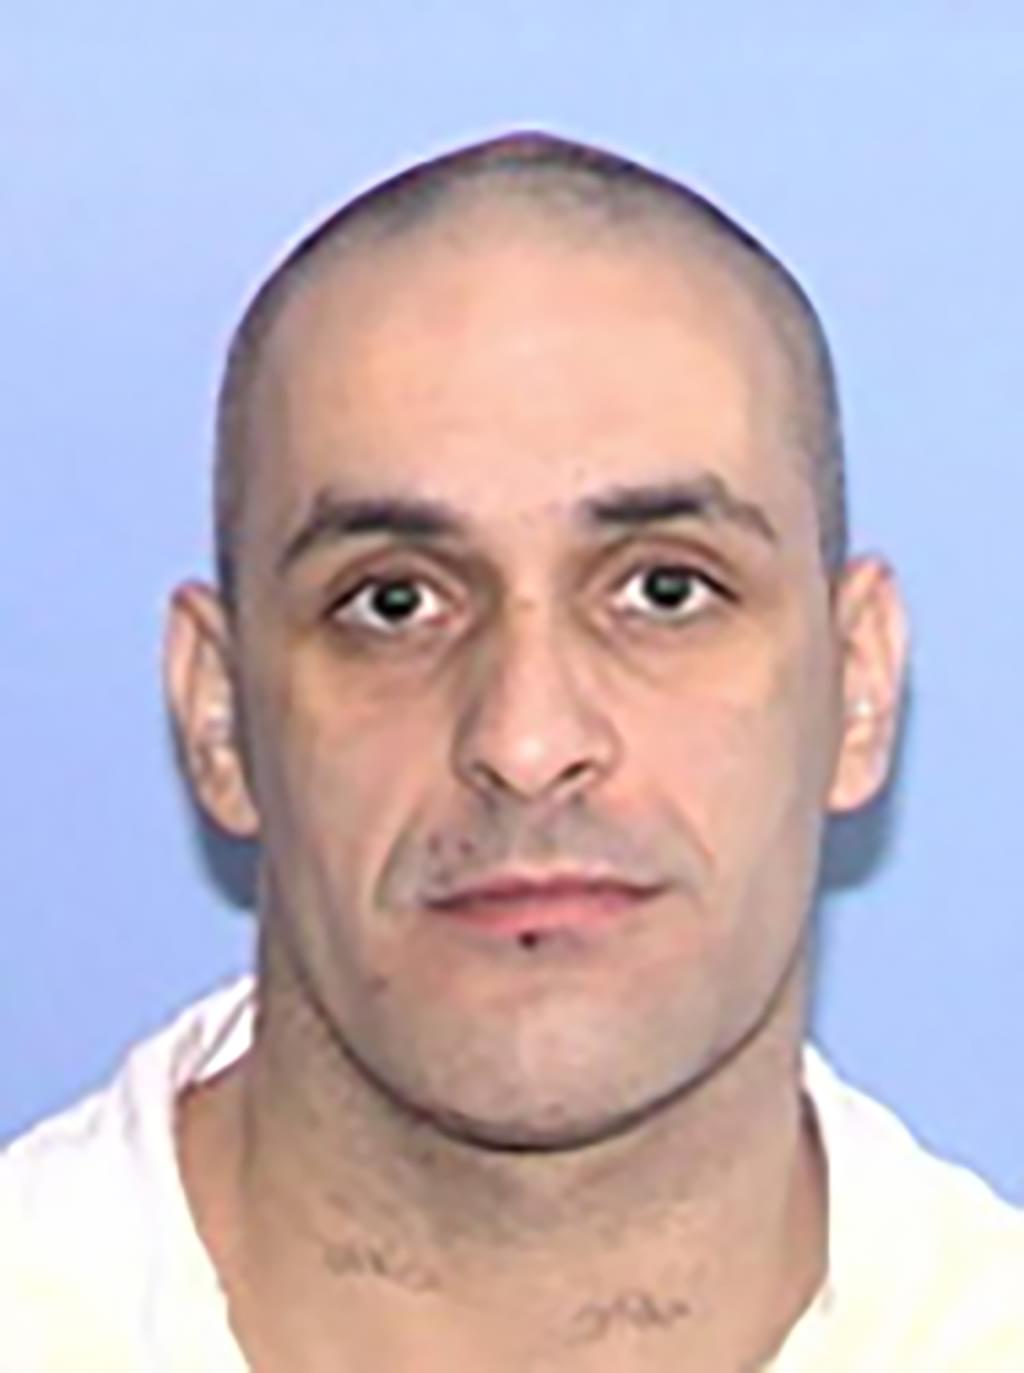 Texas Execution Stayed to Permit Proper Consideration of Intellectual Disability Claim